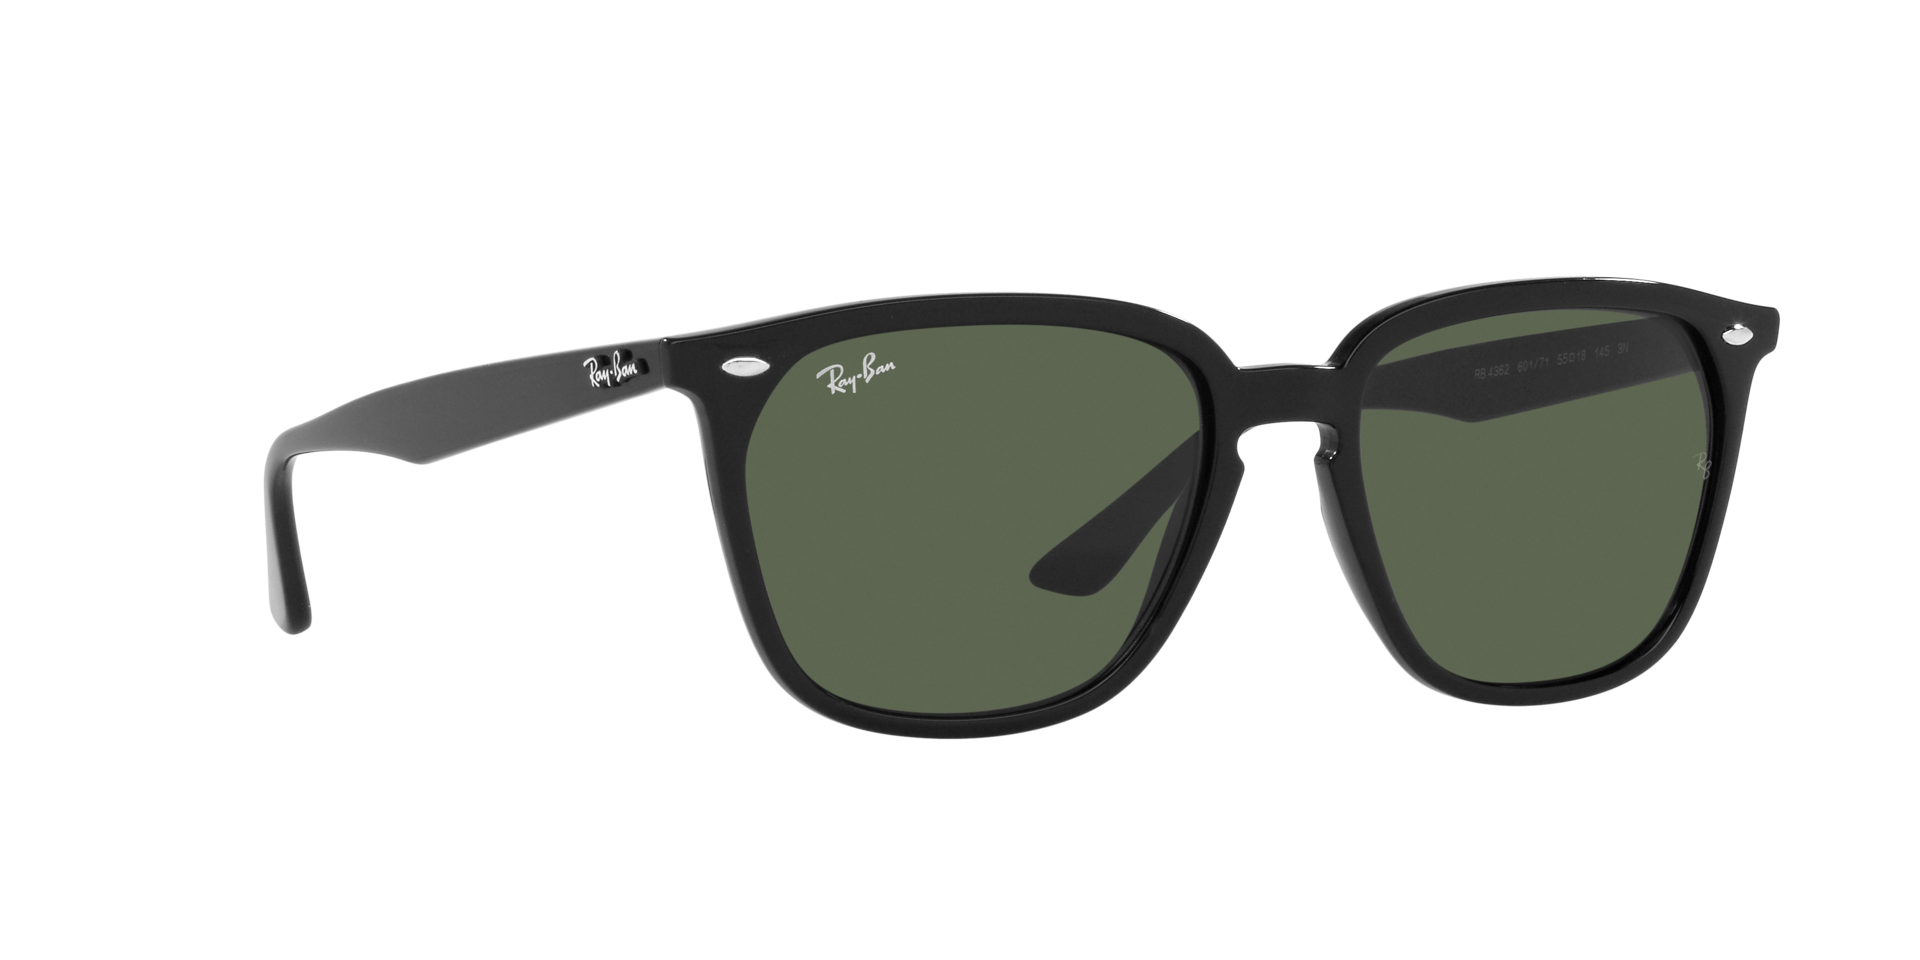 Buy Best Ray-Ban Rb4362 Sunglasses Online